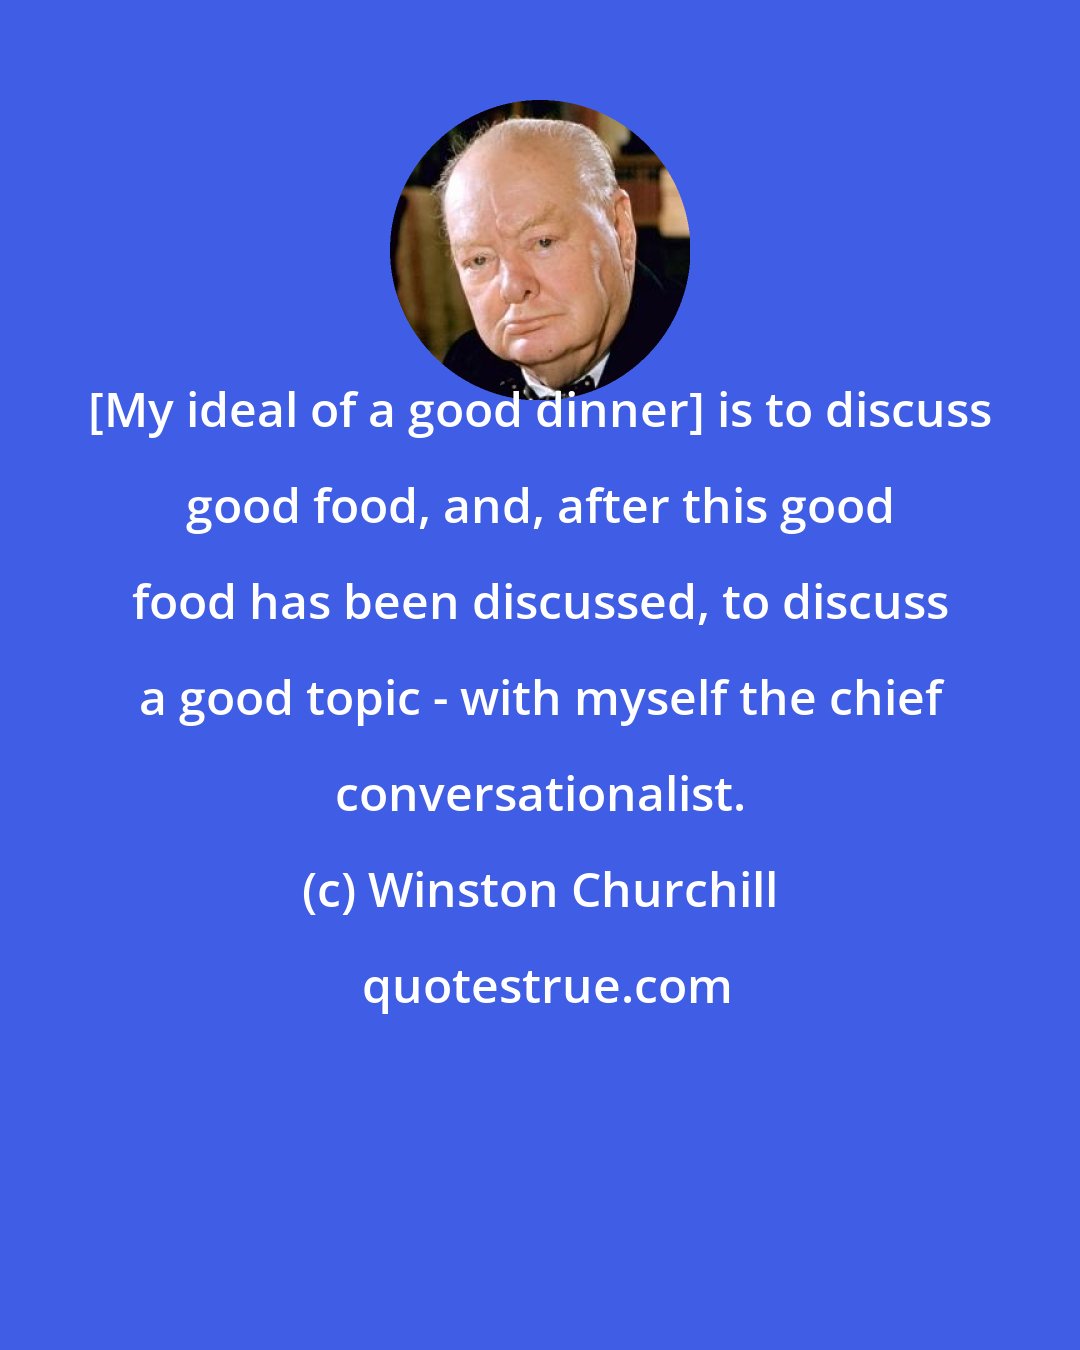 Winston Churchill: [My ideal of a good dinner] is to discuss good food, and, after this good food has been discussed, to discuss a good topic - with myself the chief conversationalist.